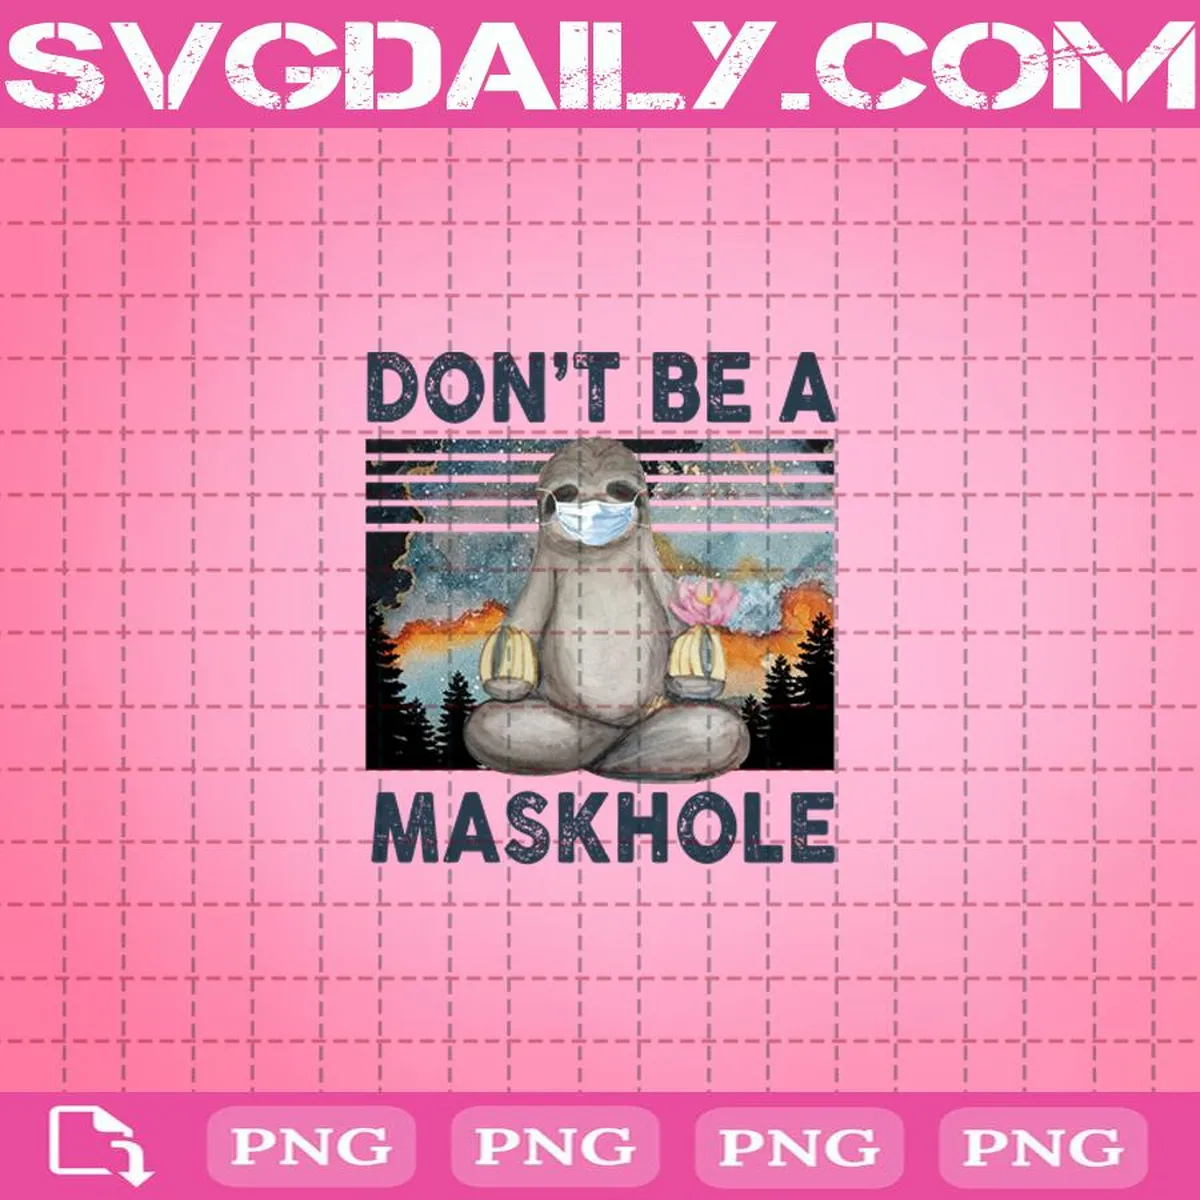 Don't Be A Maskhole Png, Sloth Png, Maskhole Png, Png Digital Download For Sublimation Or Screens